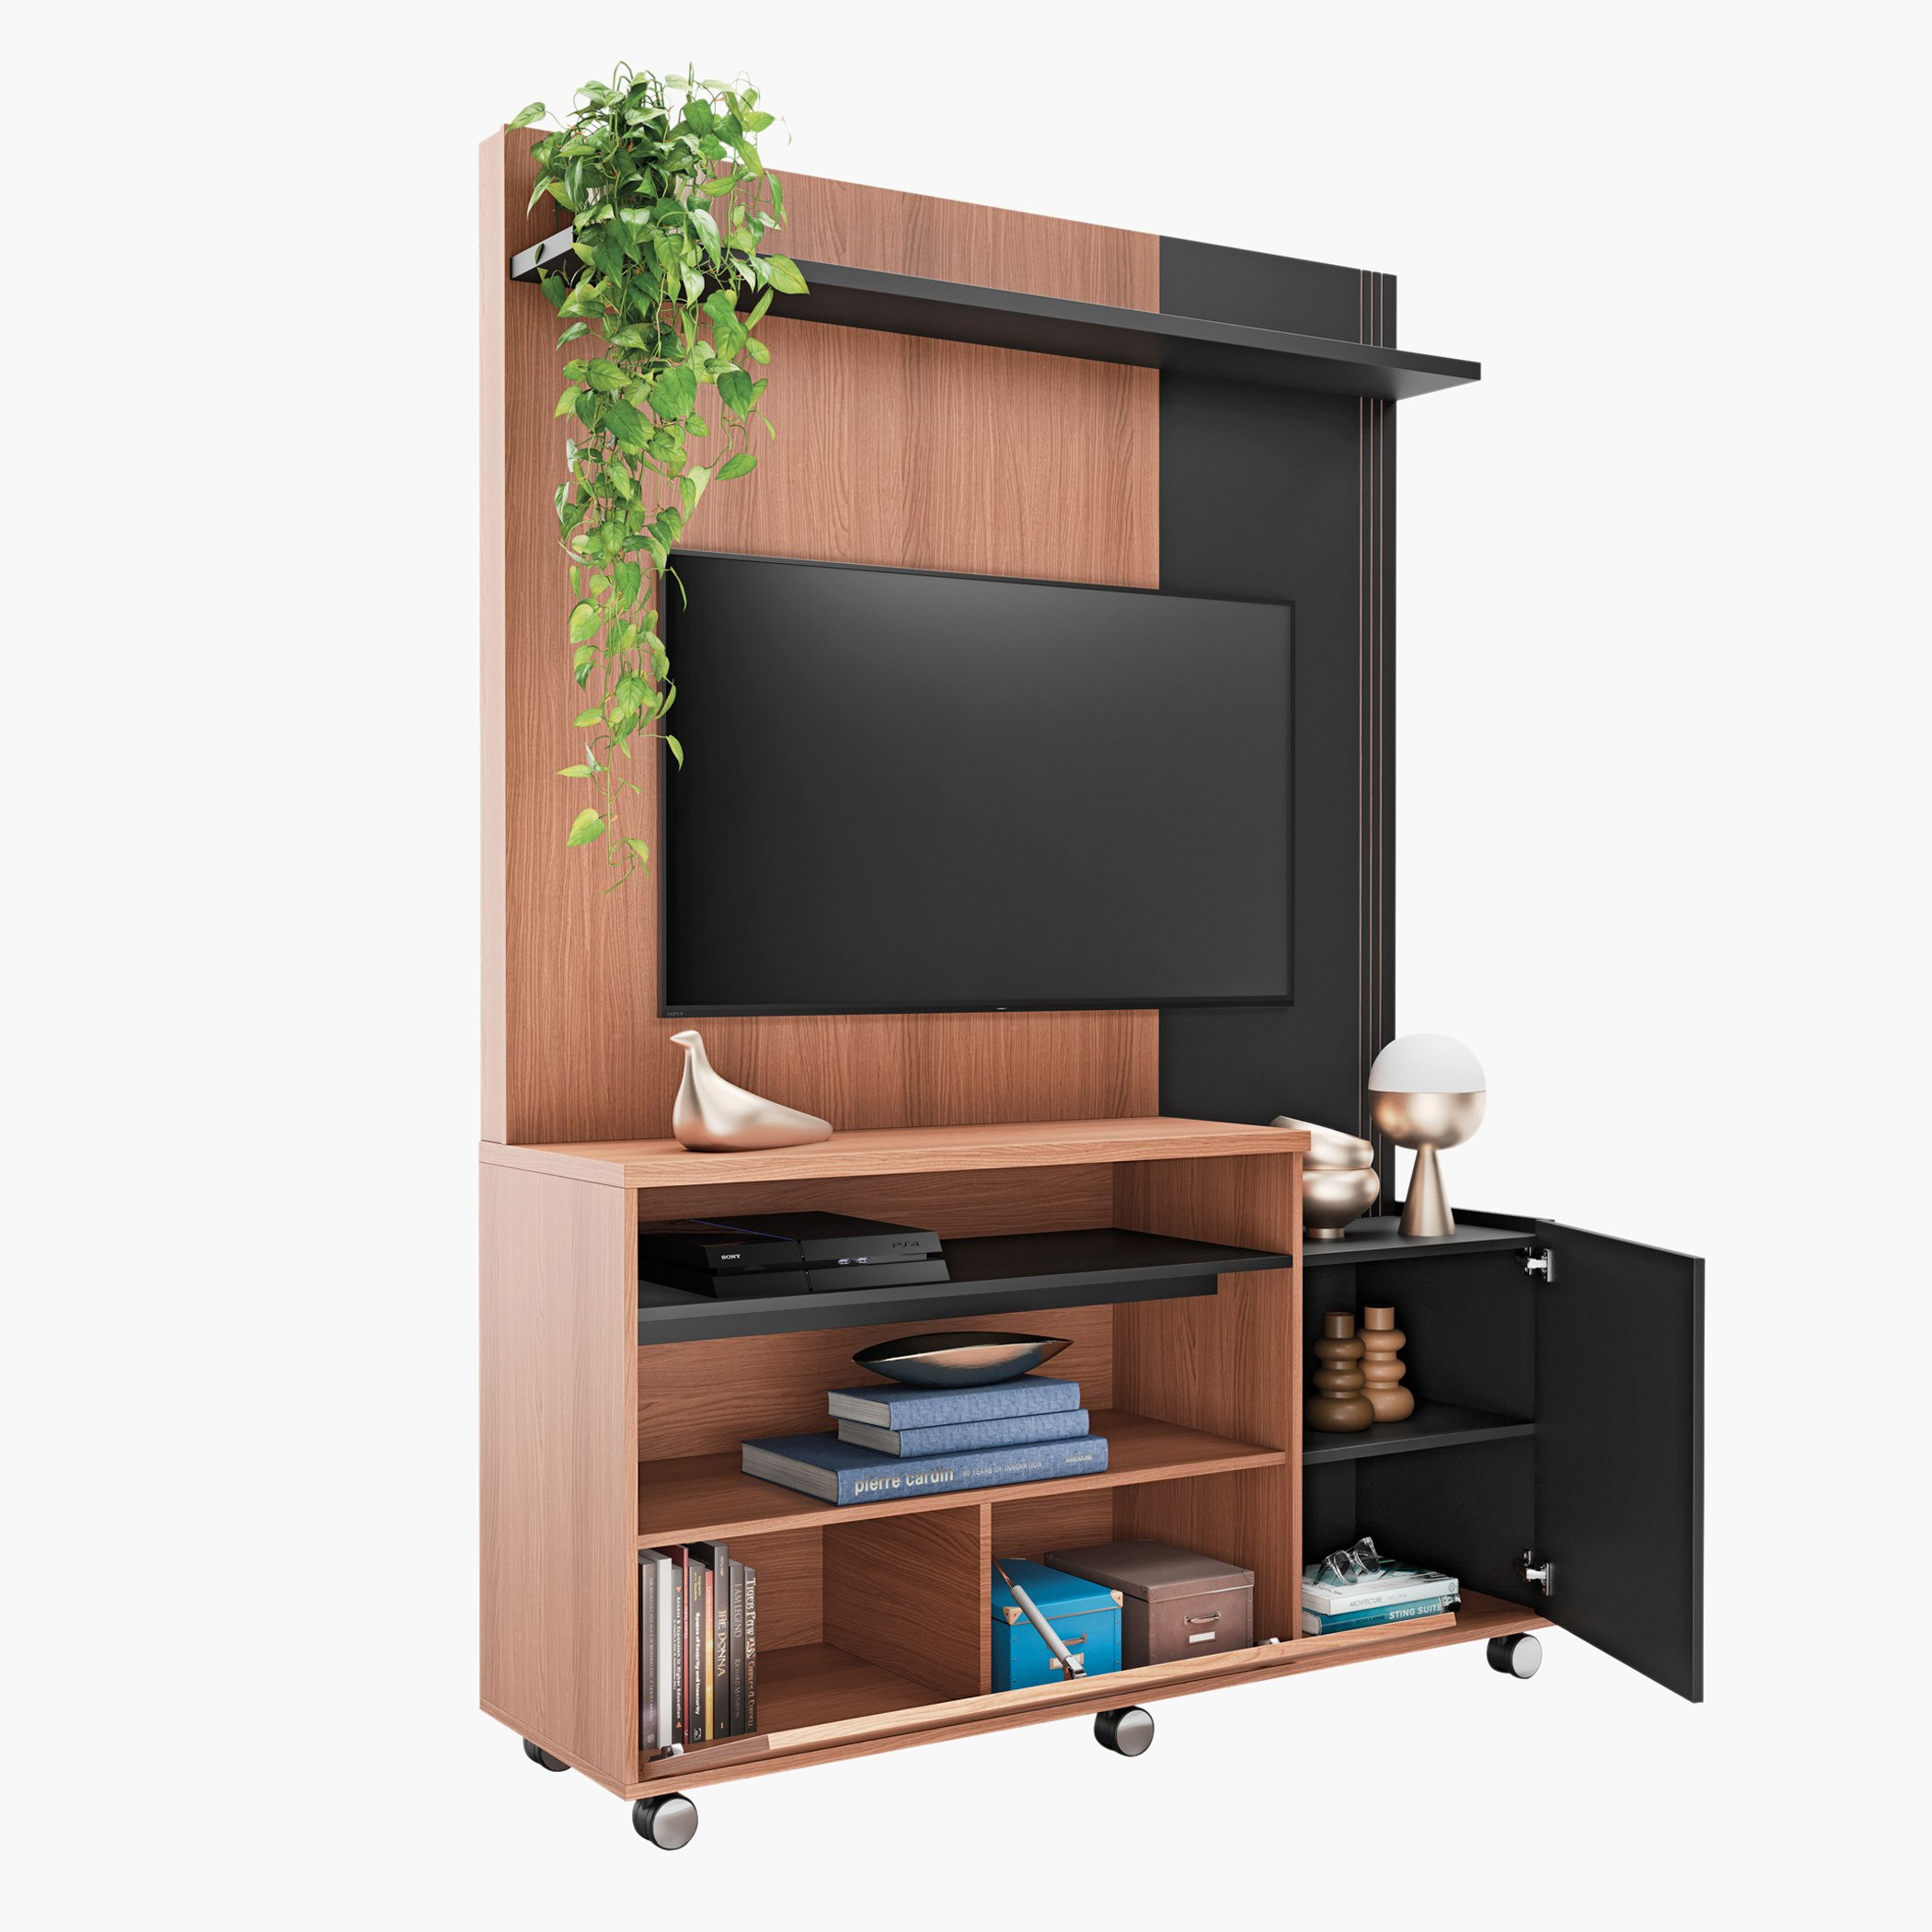 Eureka Wall Unit for TVs up to 55 inches